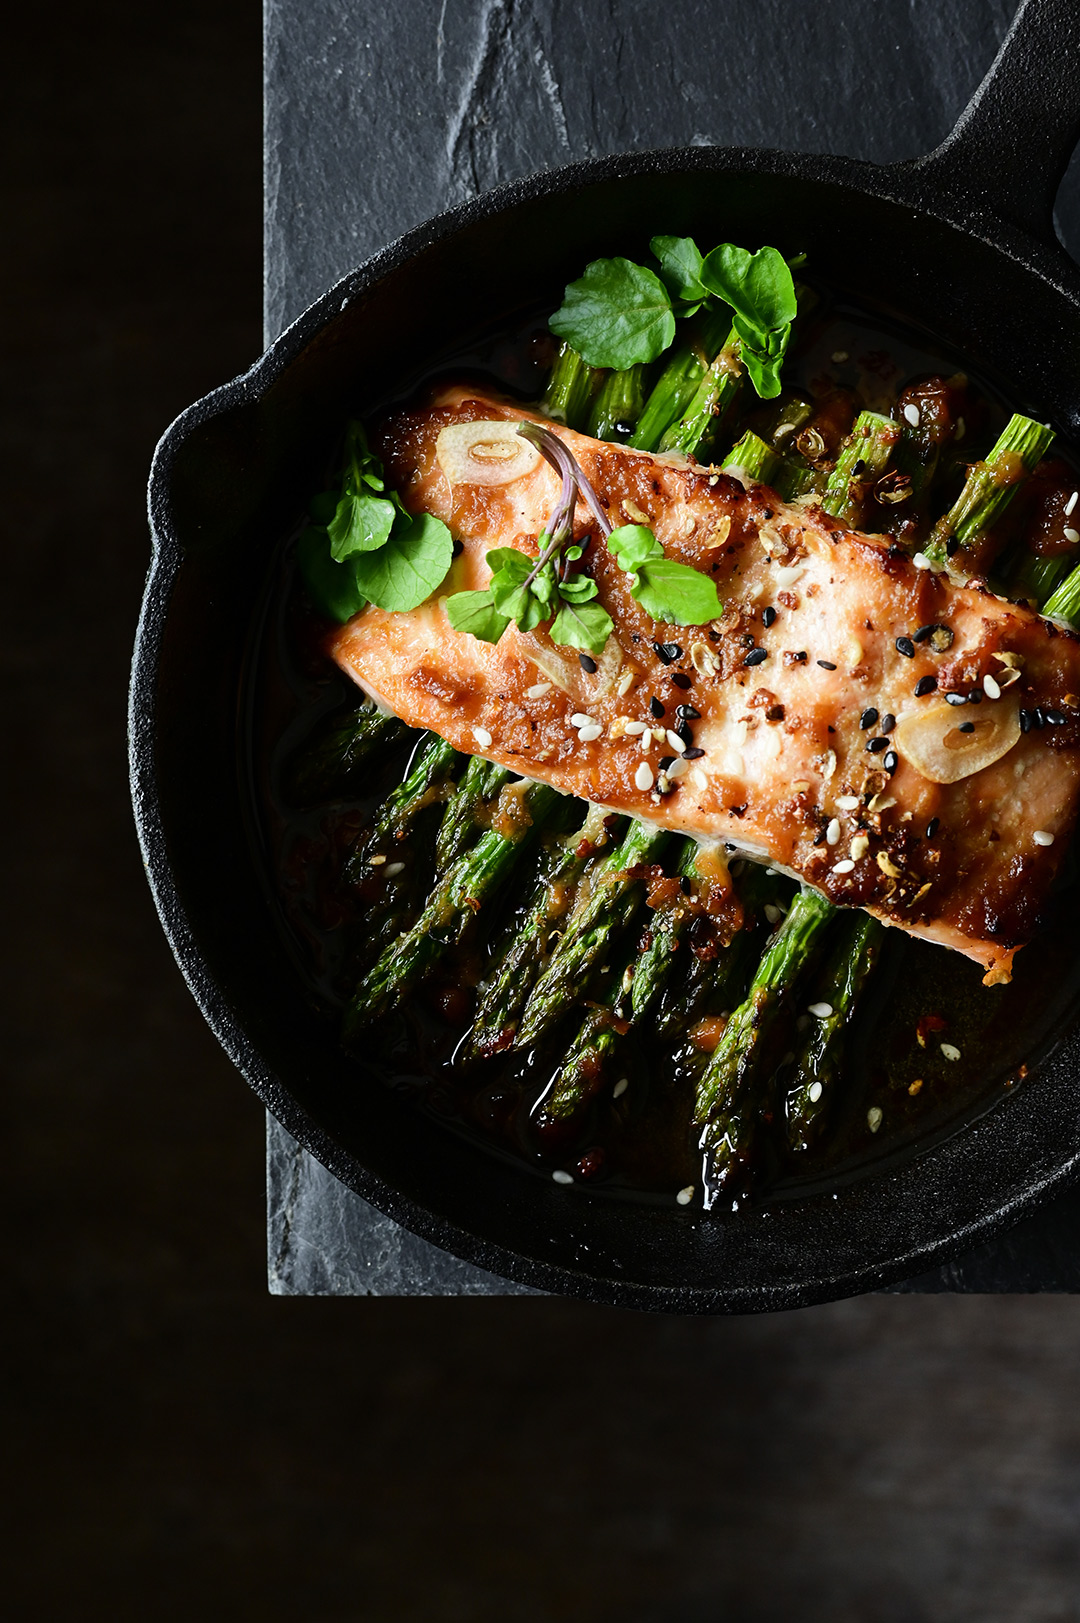 serving dumplings | Miso roasted salmon with asparagus